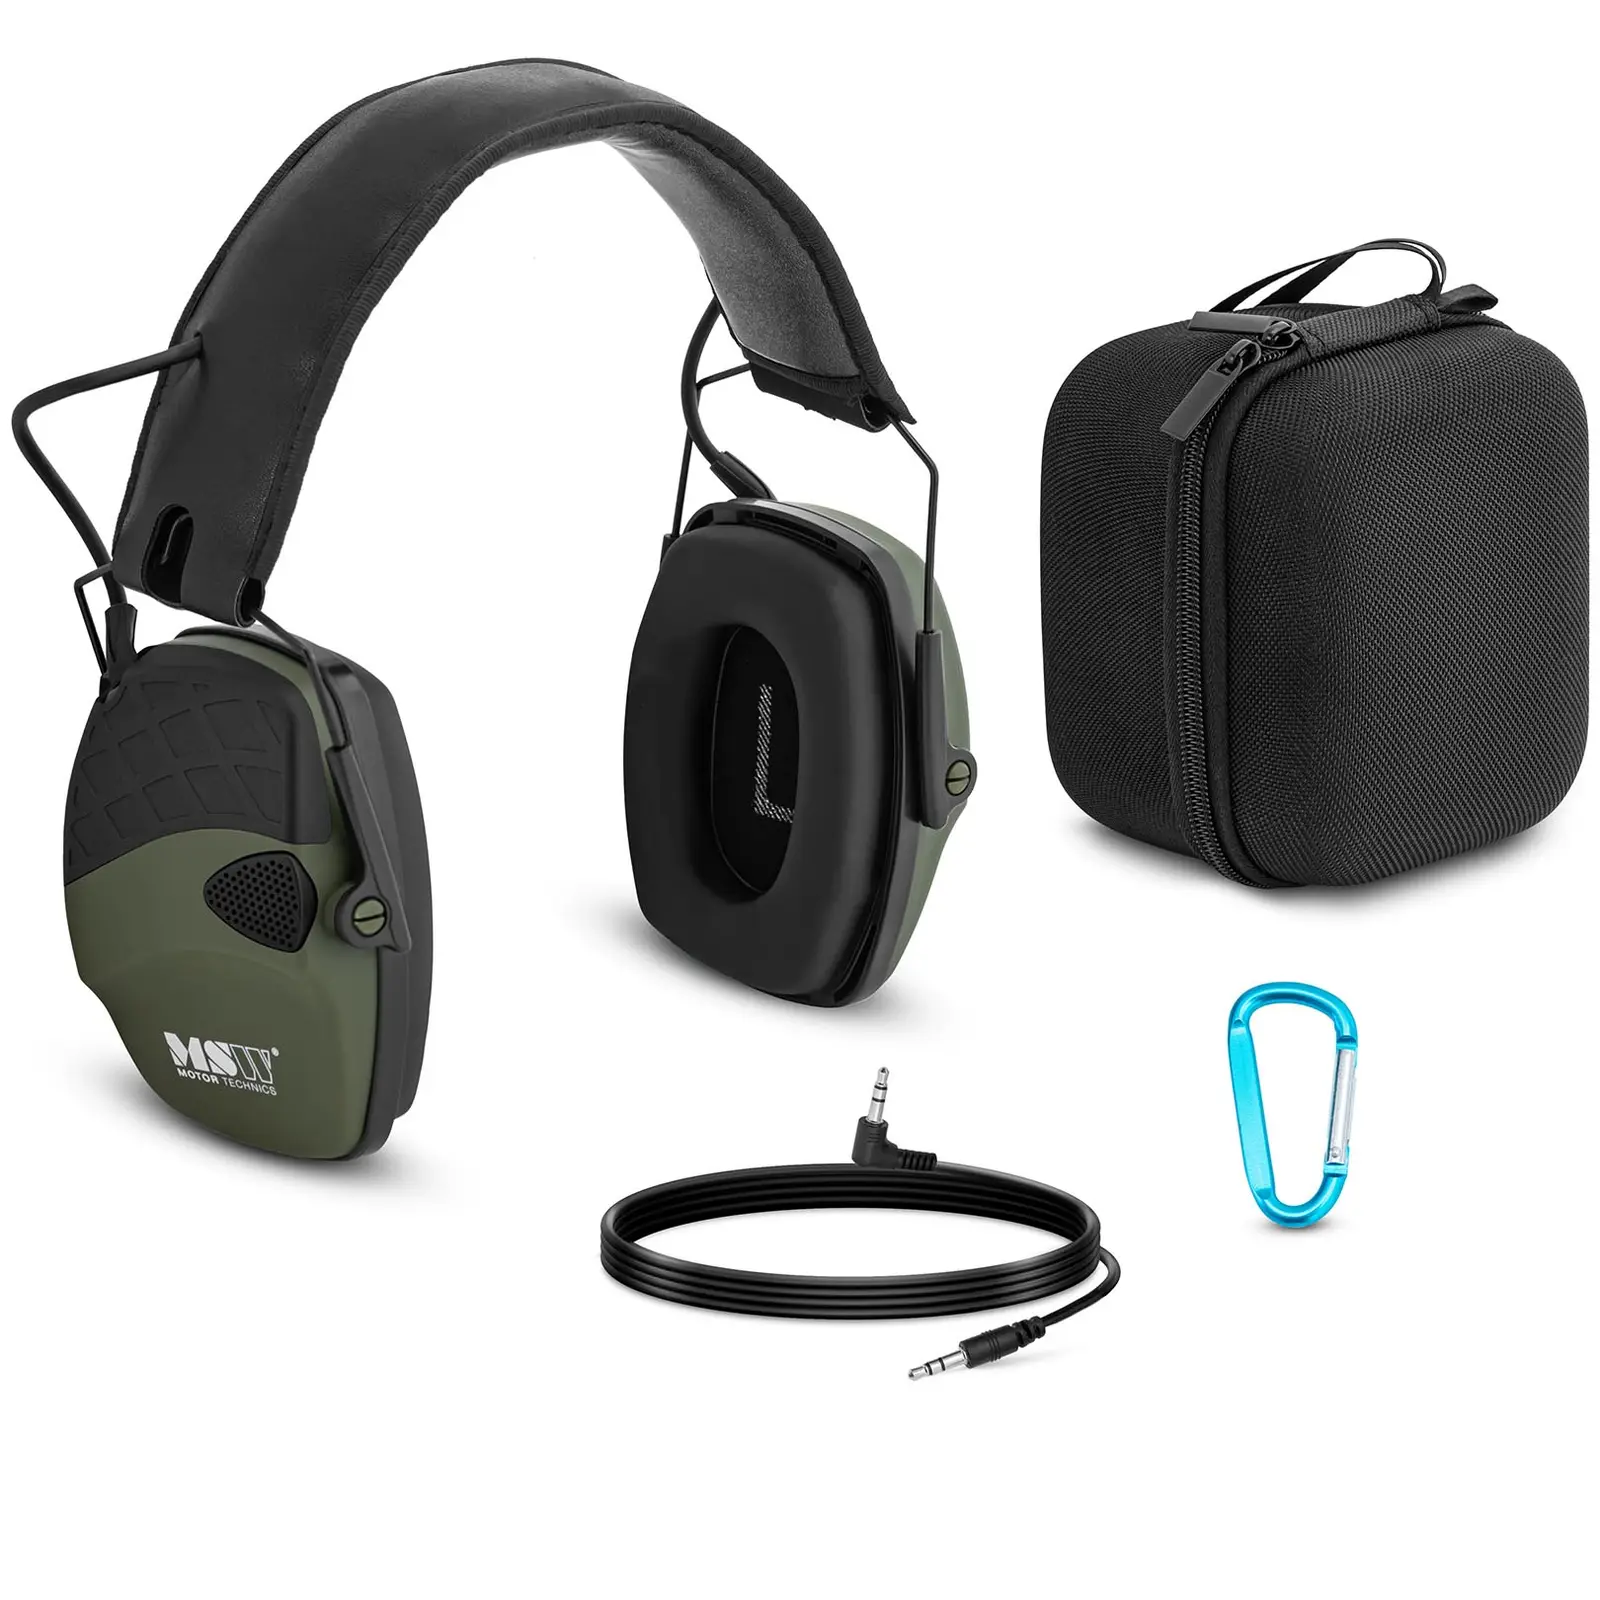 Hearing protection - dynamic external noise control - green